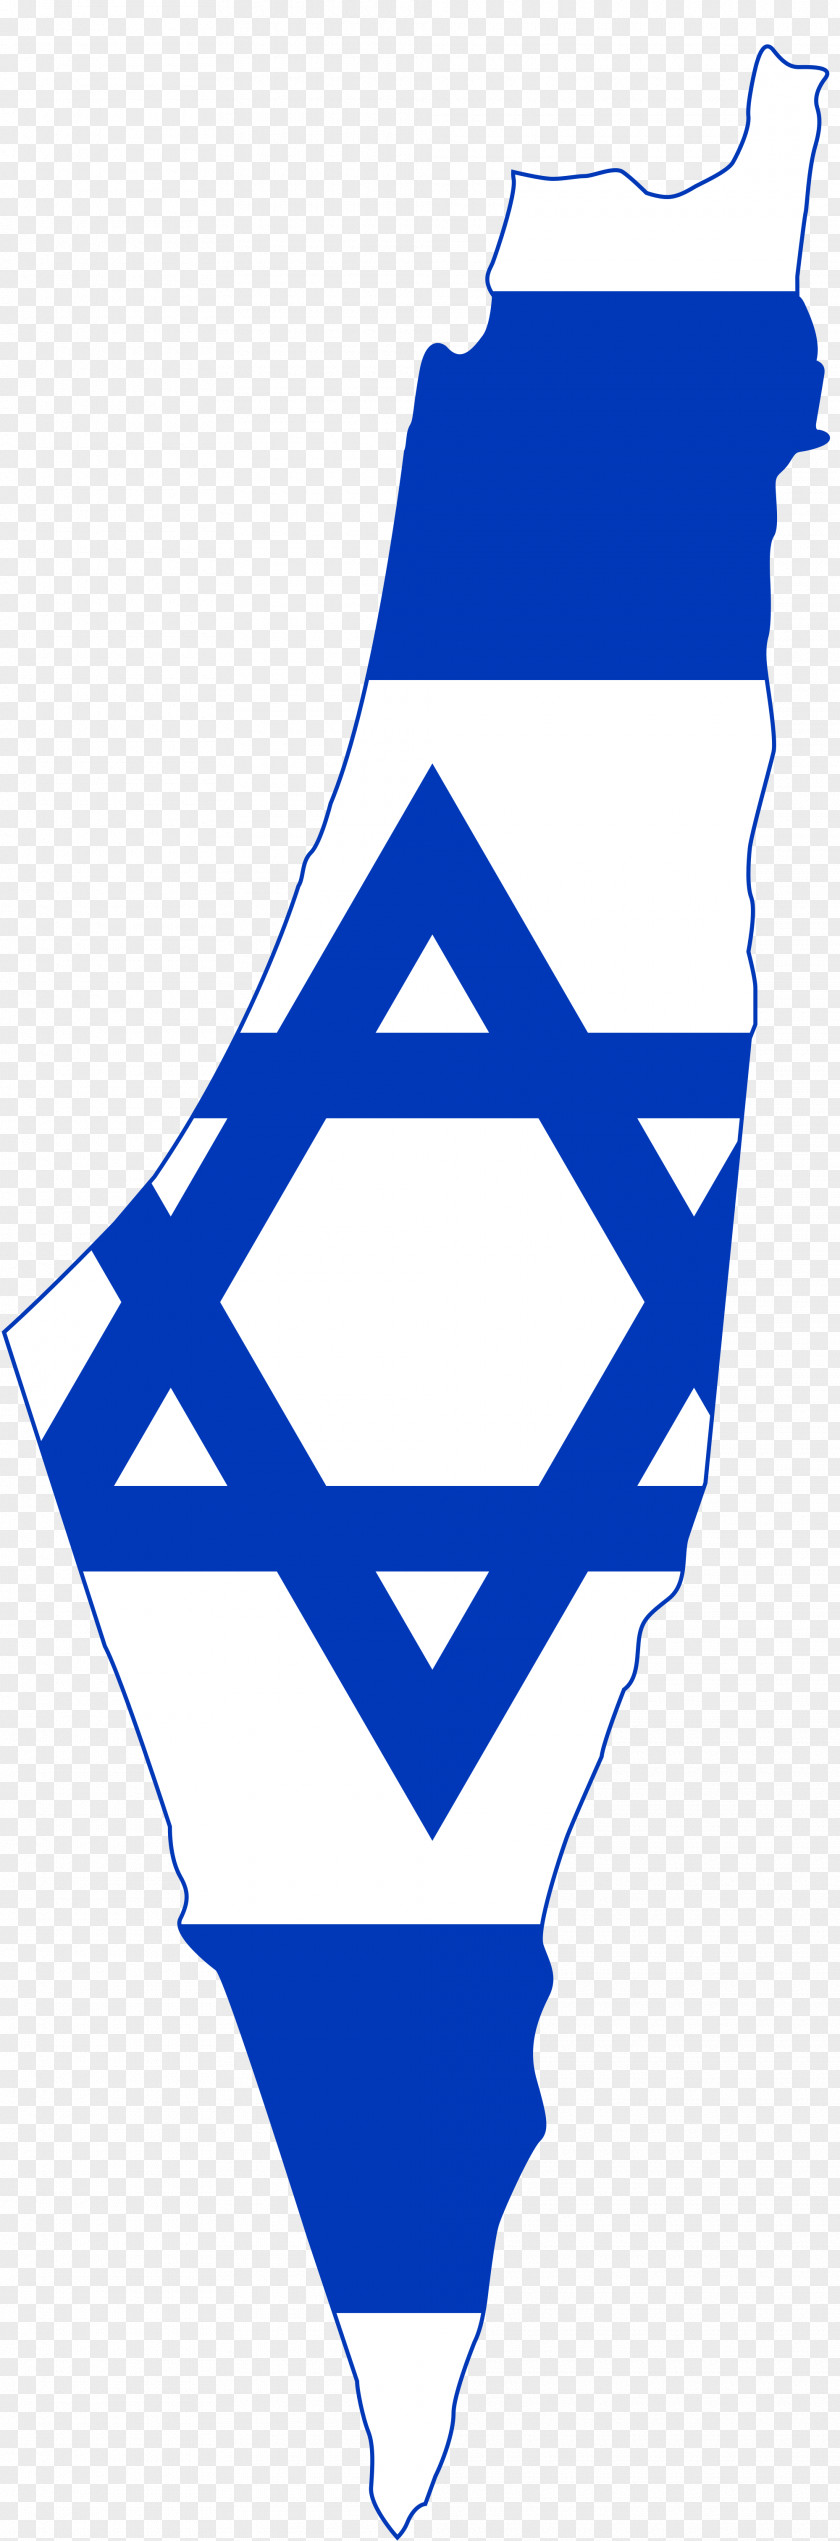 Taiwan Flag Of Israel State Palestine Map Clip Art PNG